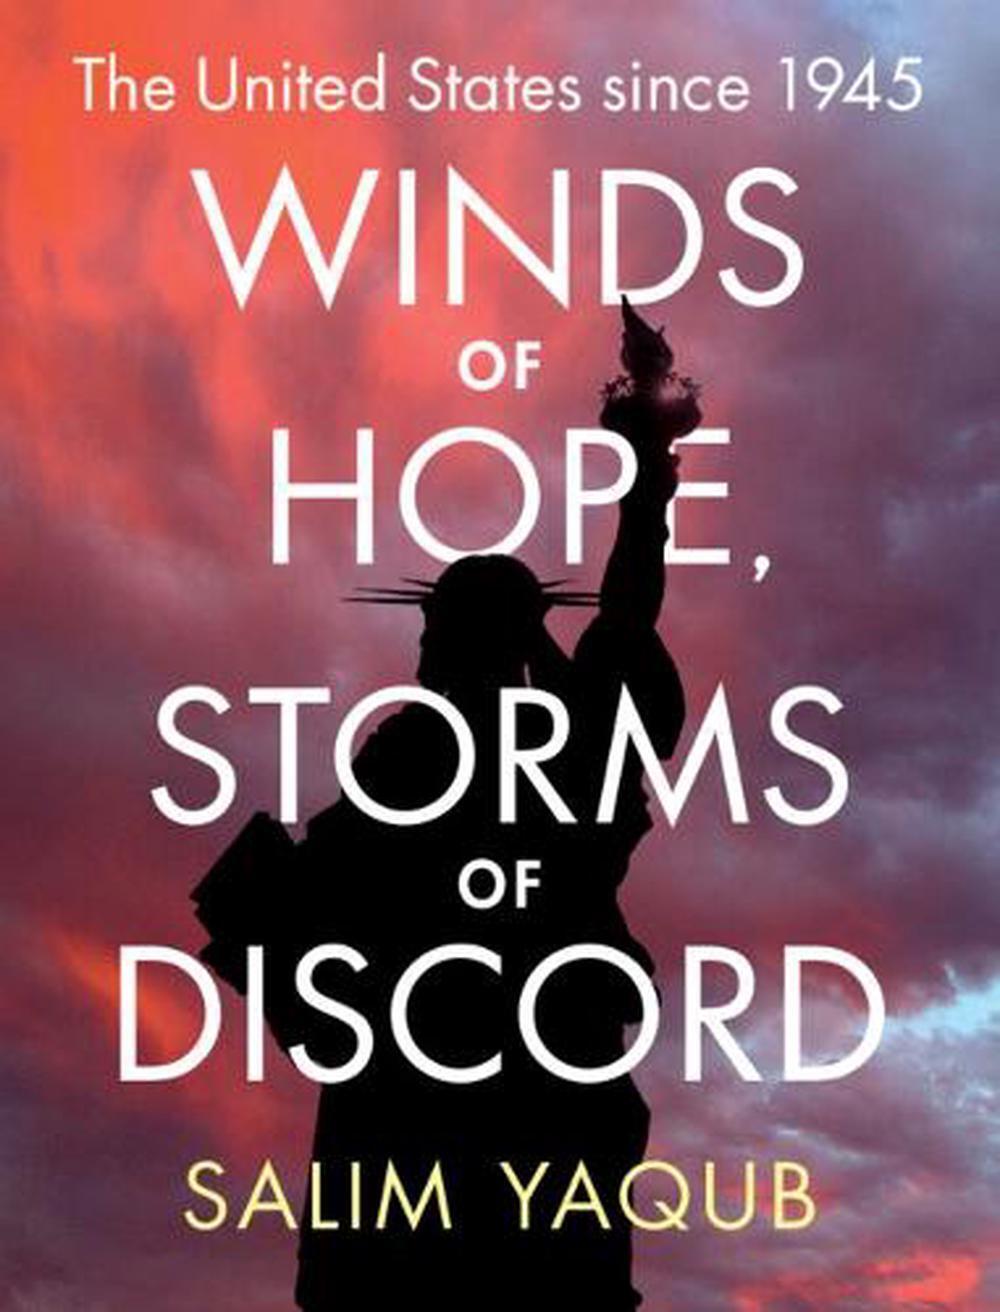 Book cover for 'The United States Since 1945: Winds of Hope, Storms of Discord' by Salim Yaqub